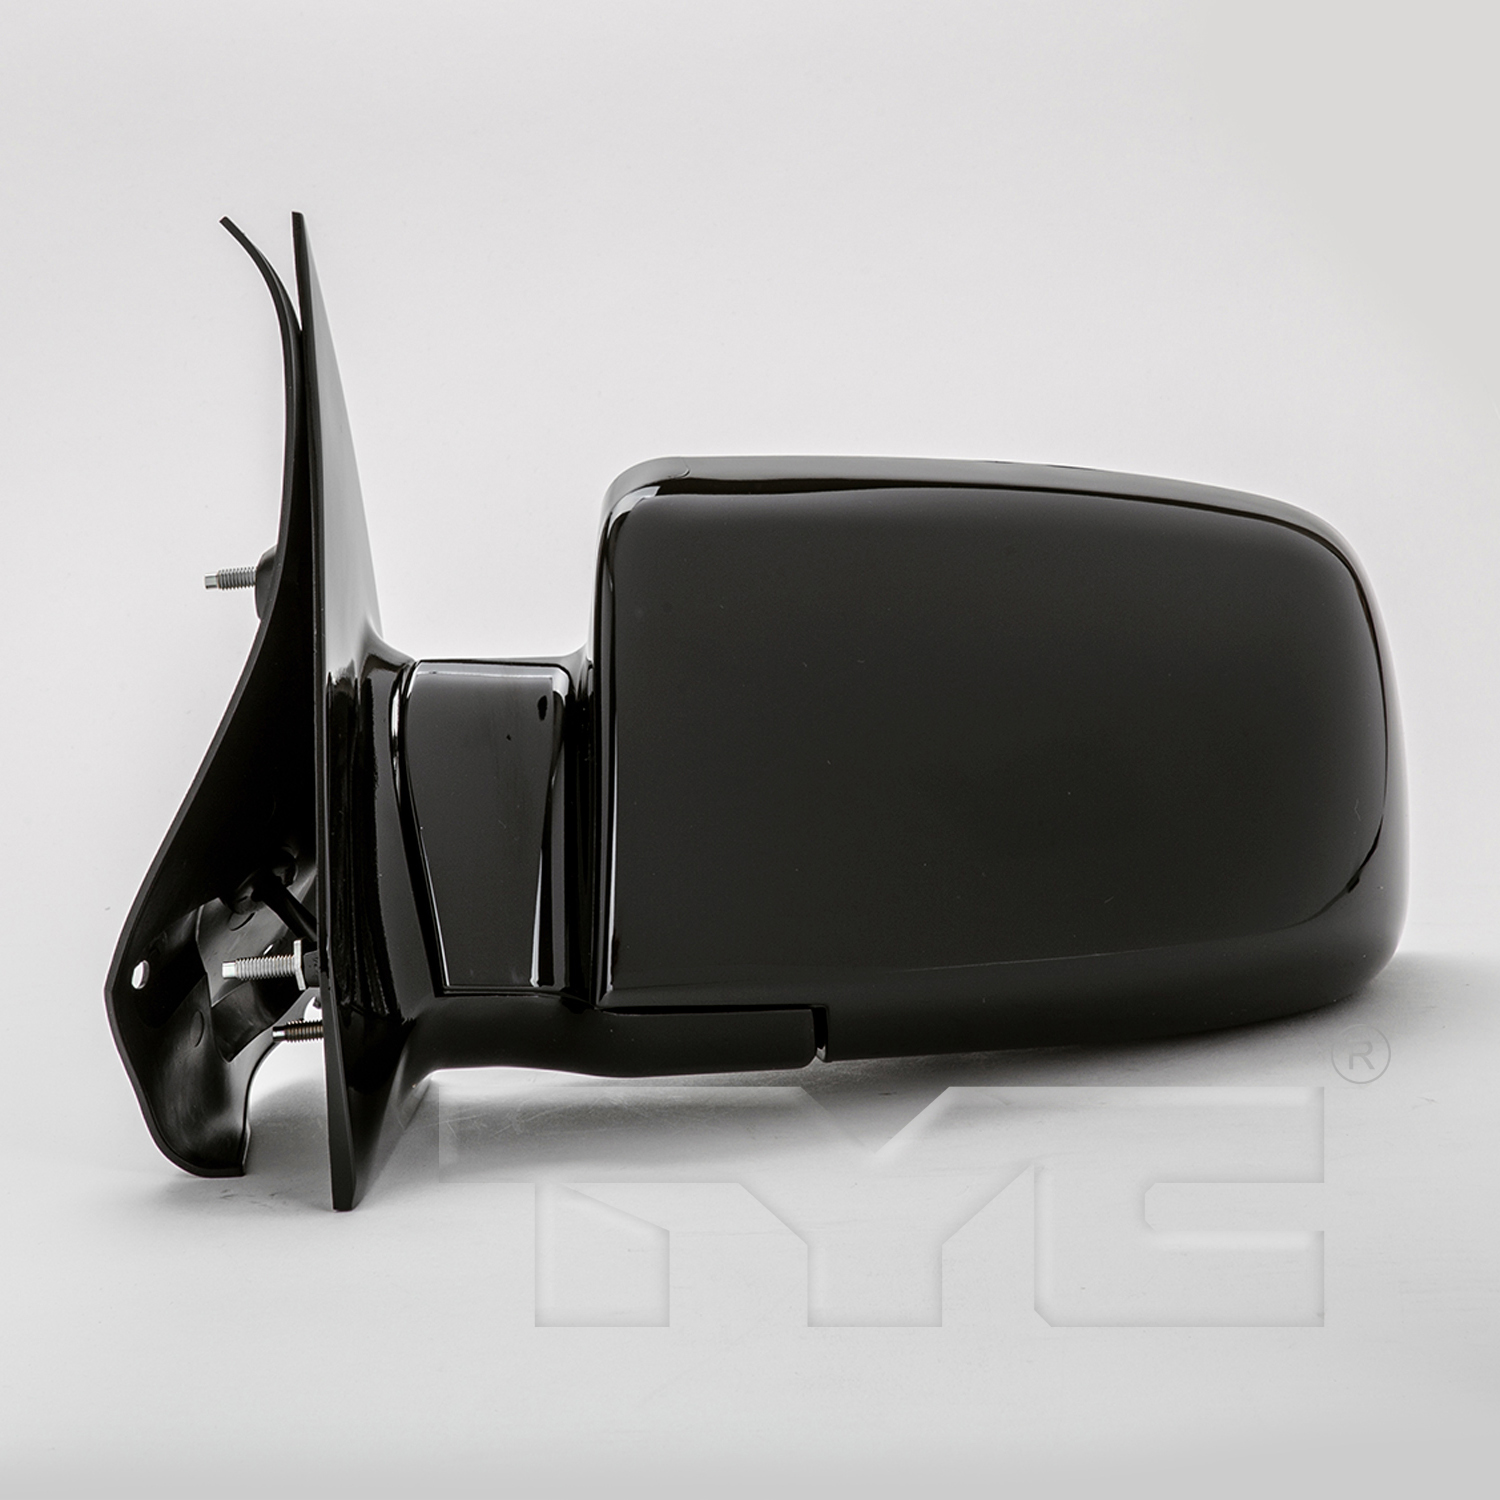 Aftermarket MIRRORS for CHEVROLET - ASTRO, ASTRO,88-98,LT Mirror outside rear view